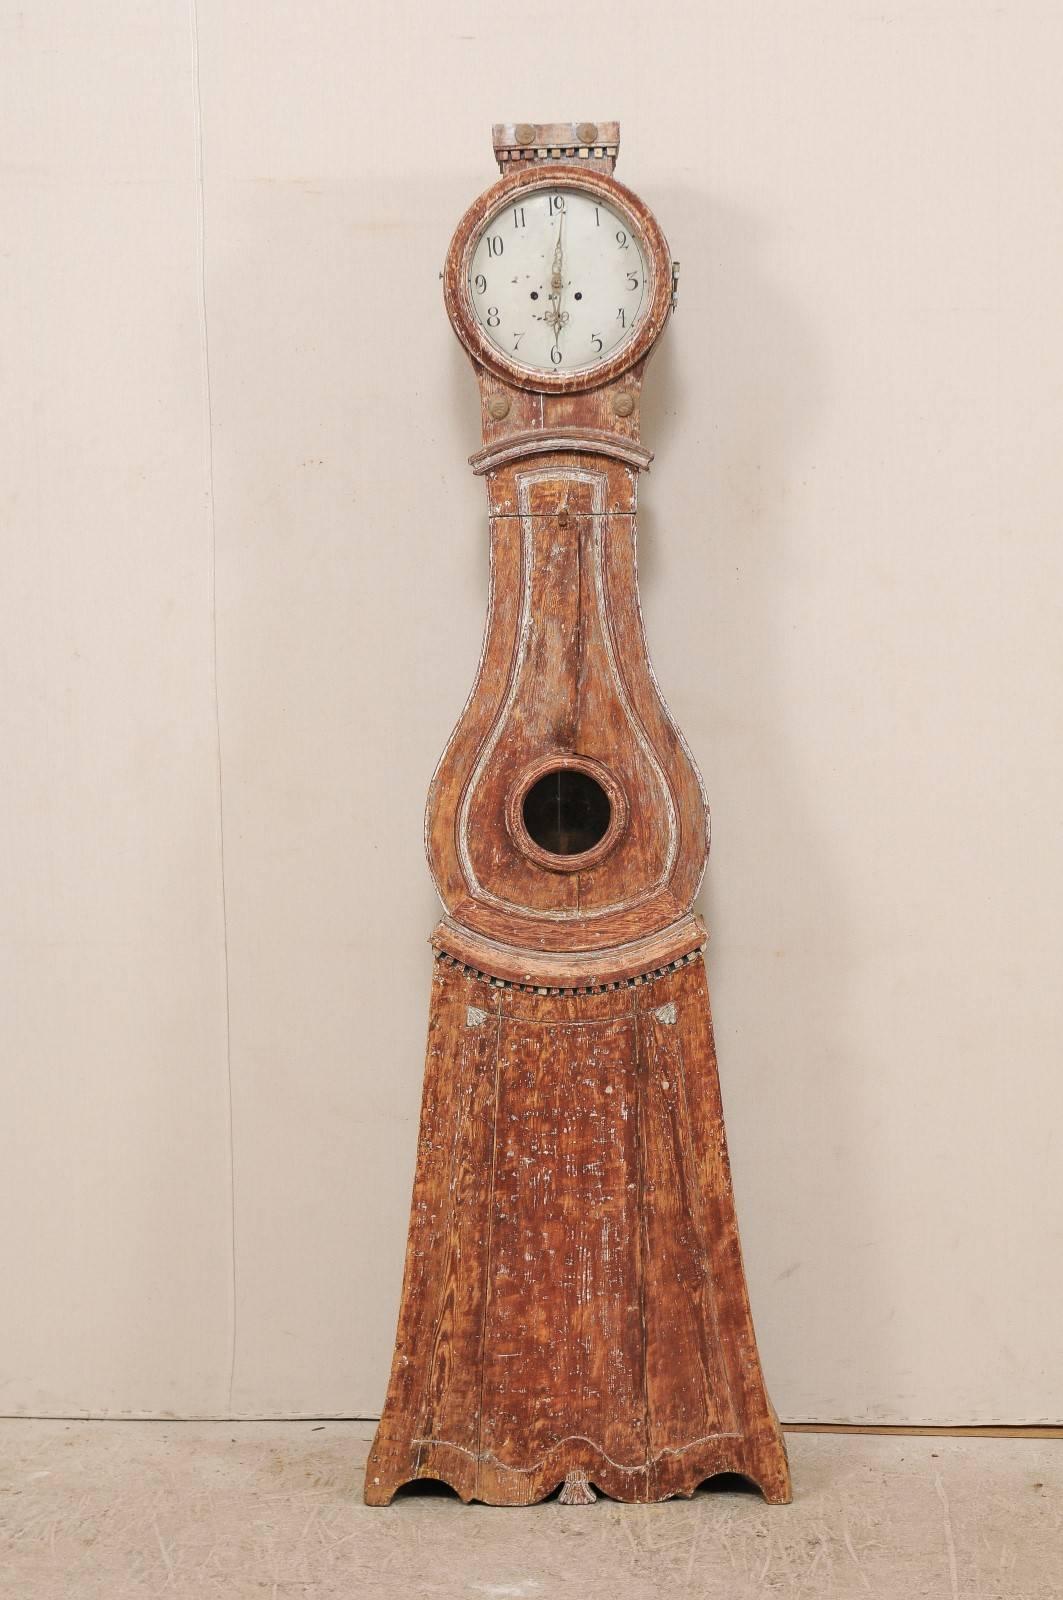 A 19th century painted wood Swedish clock. This Swedish clock from the 1820s features a raised flat-top crest, its original round metal face and movements, a raindrop shaped belly and triangular bottom. There are carved dentil accents about the